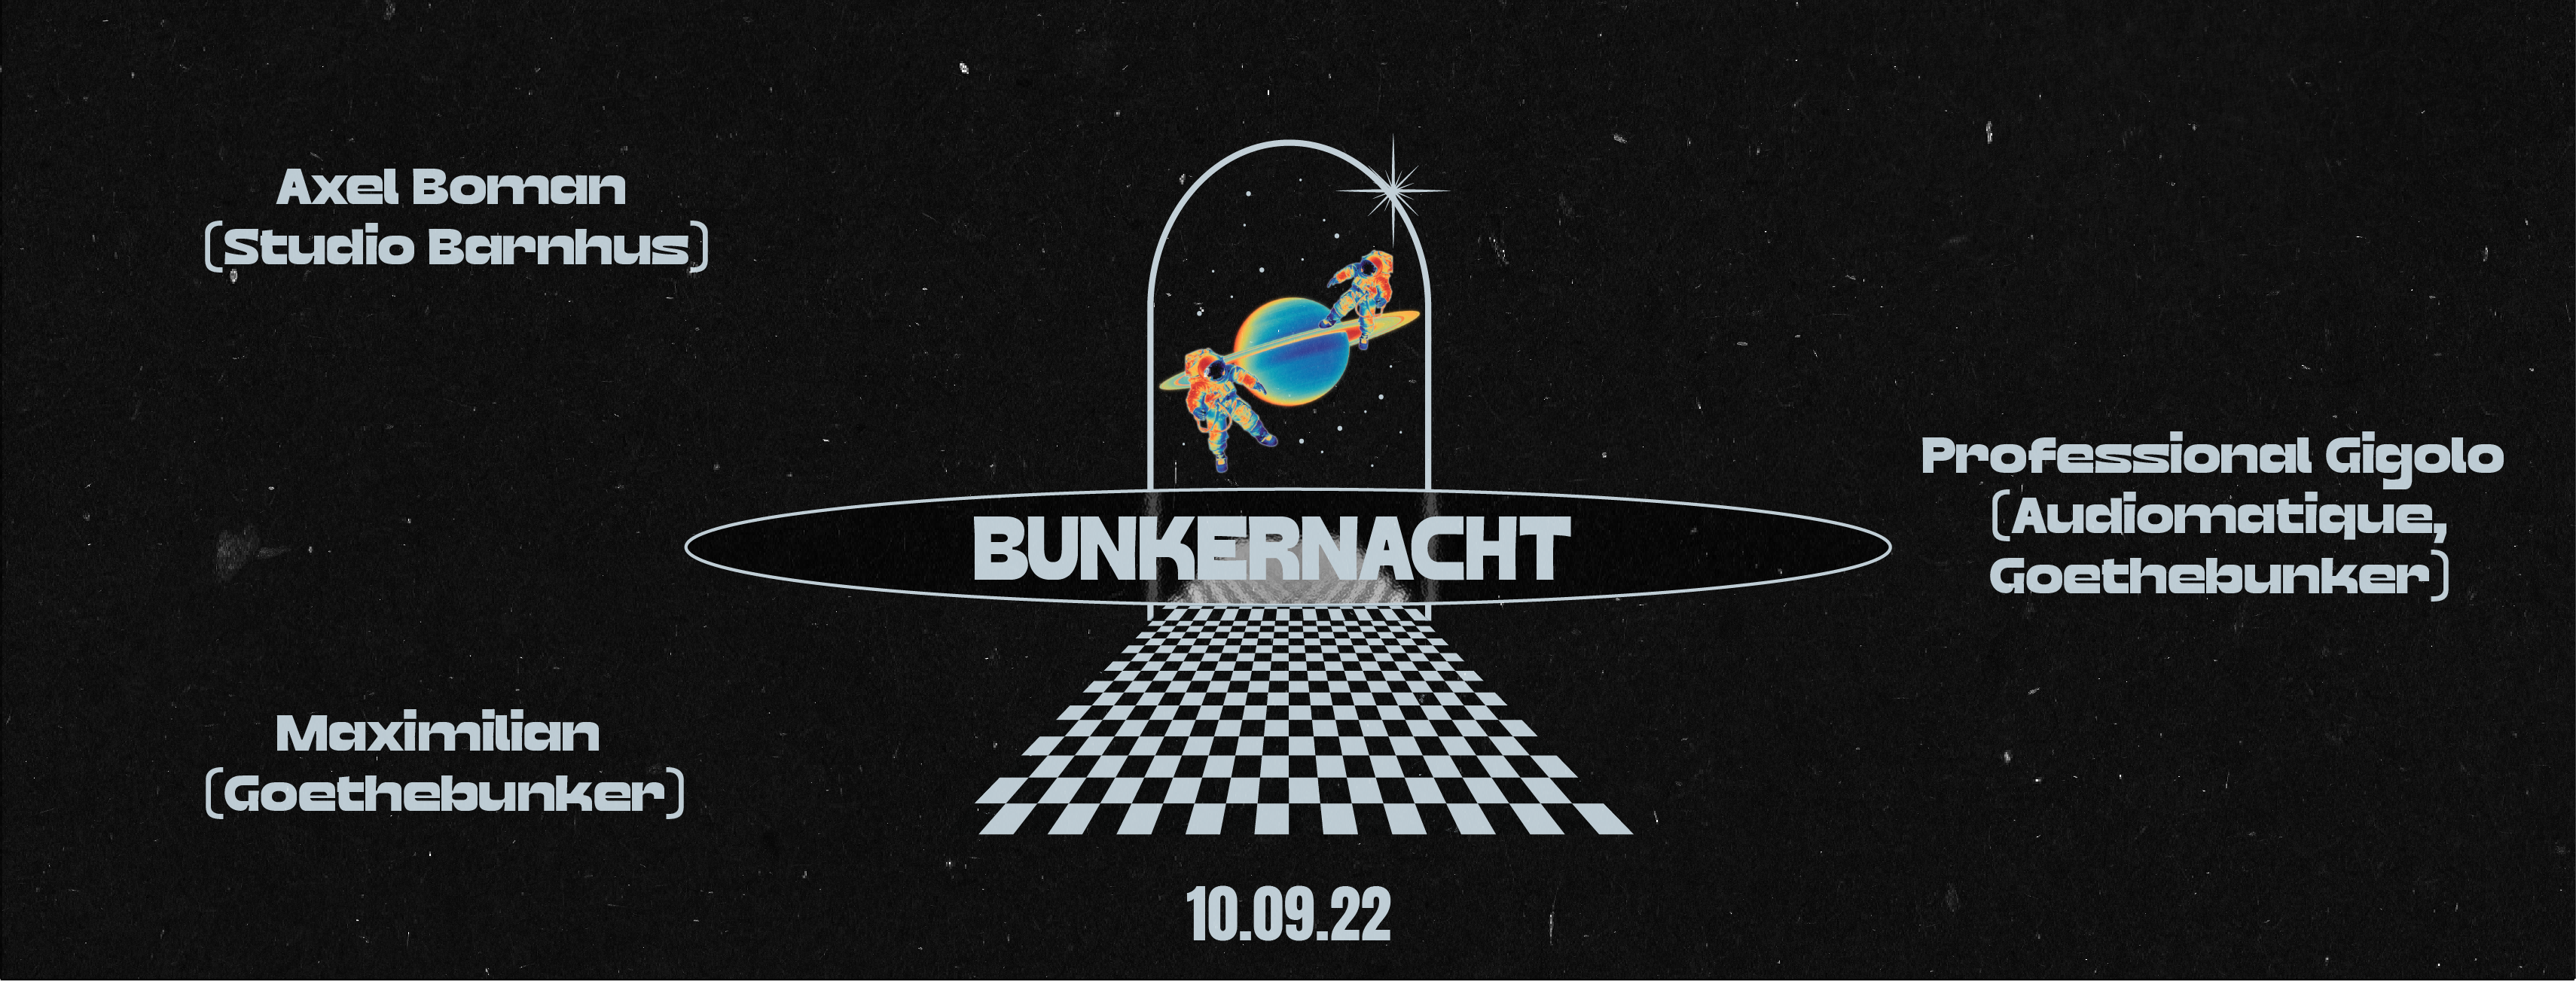 Bunkernacht with Axel Boman - フライヤー表